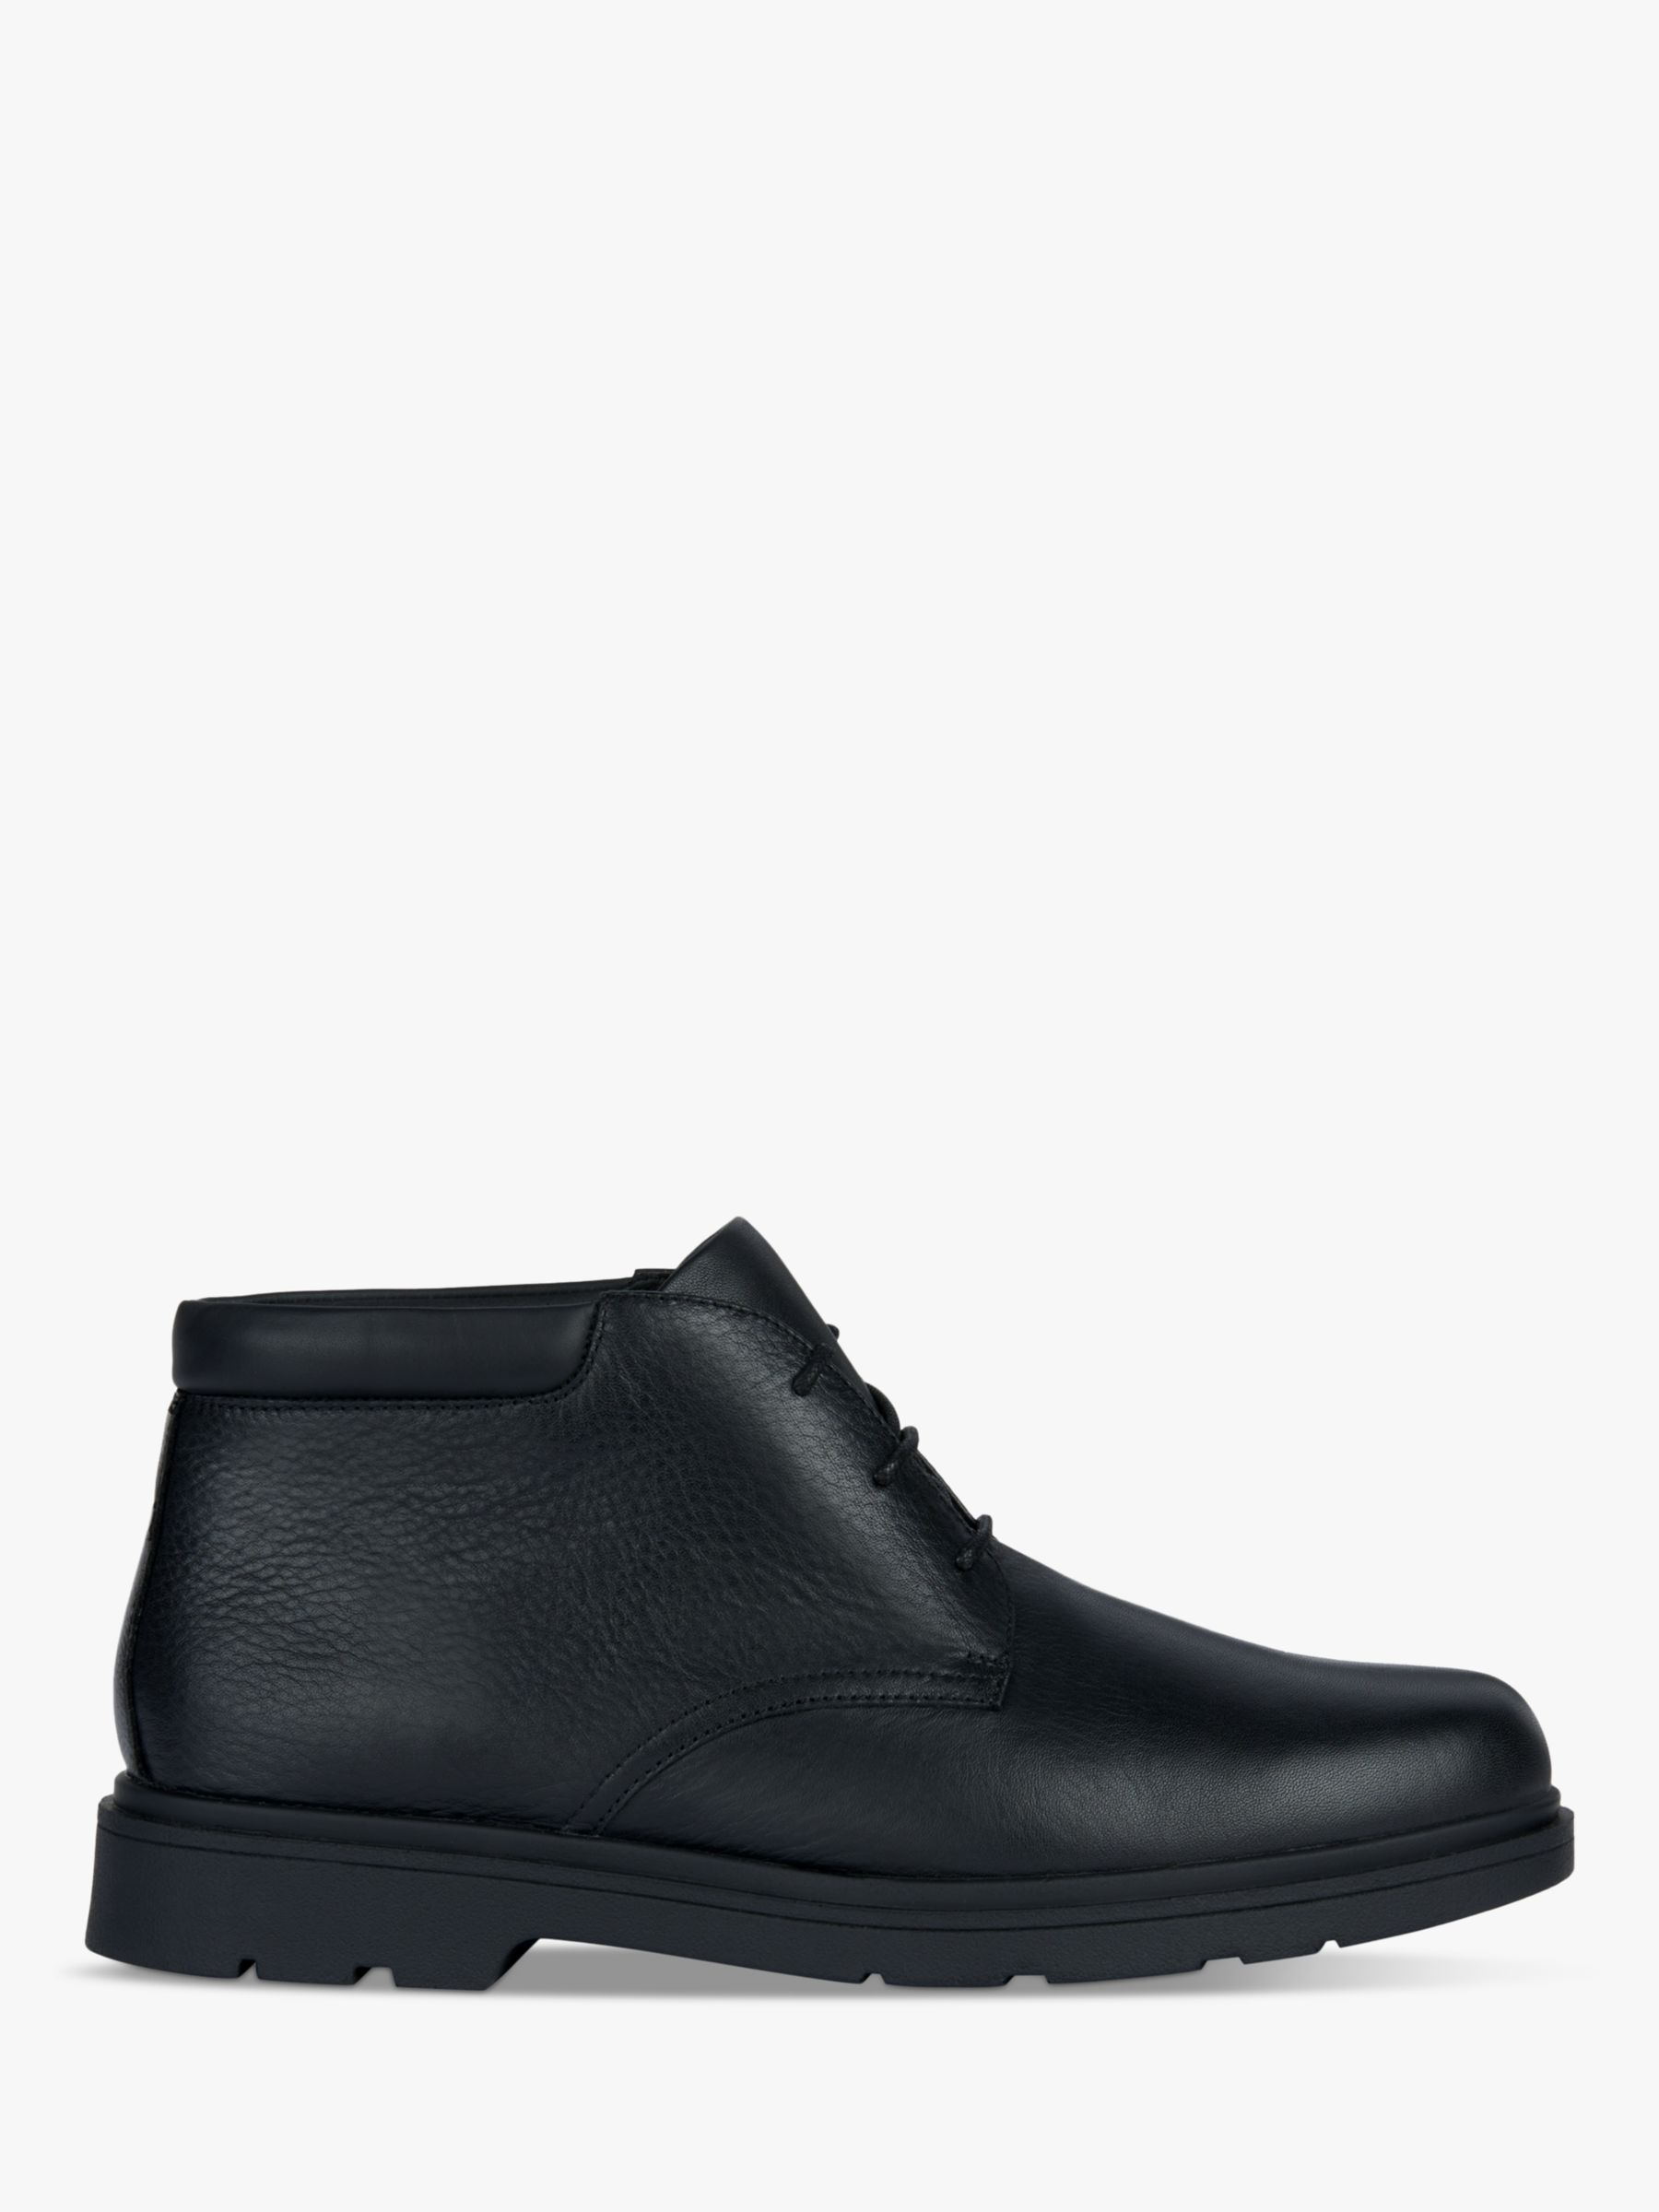 Geox Wide Fit Spherica EC1 Leather Ankle Boots, Black at John Lewis ...